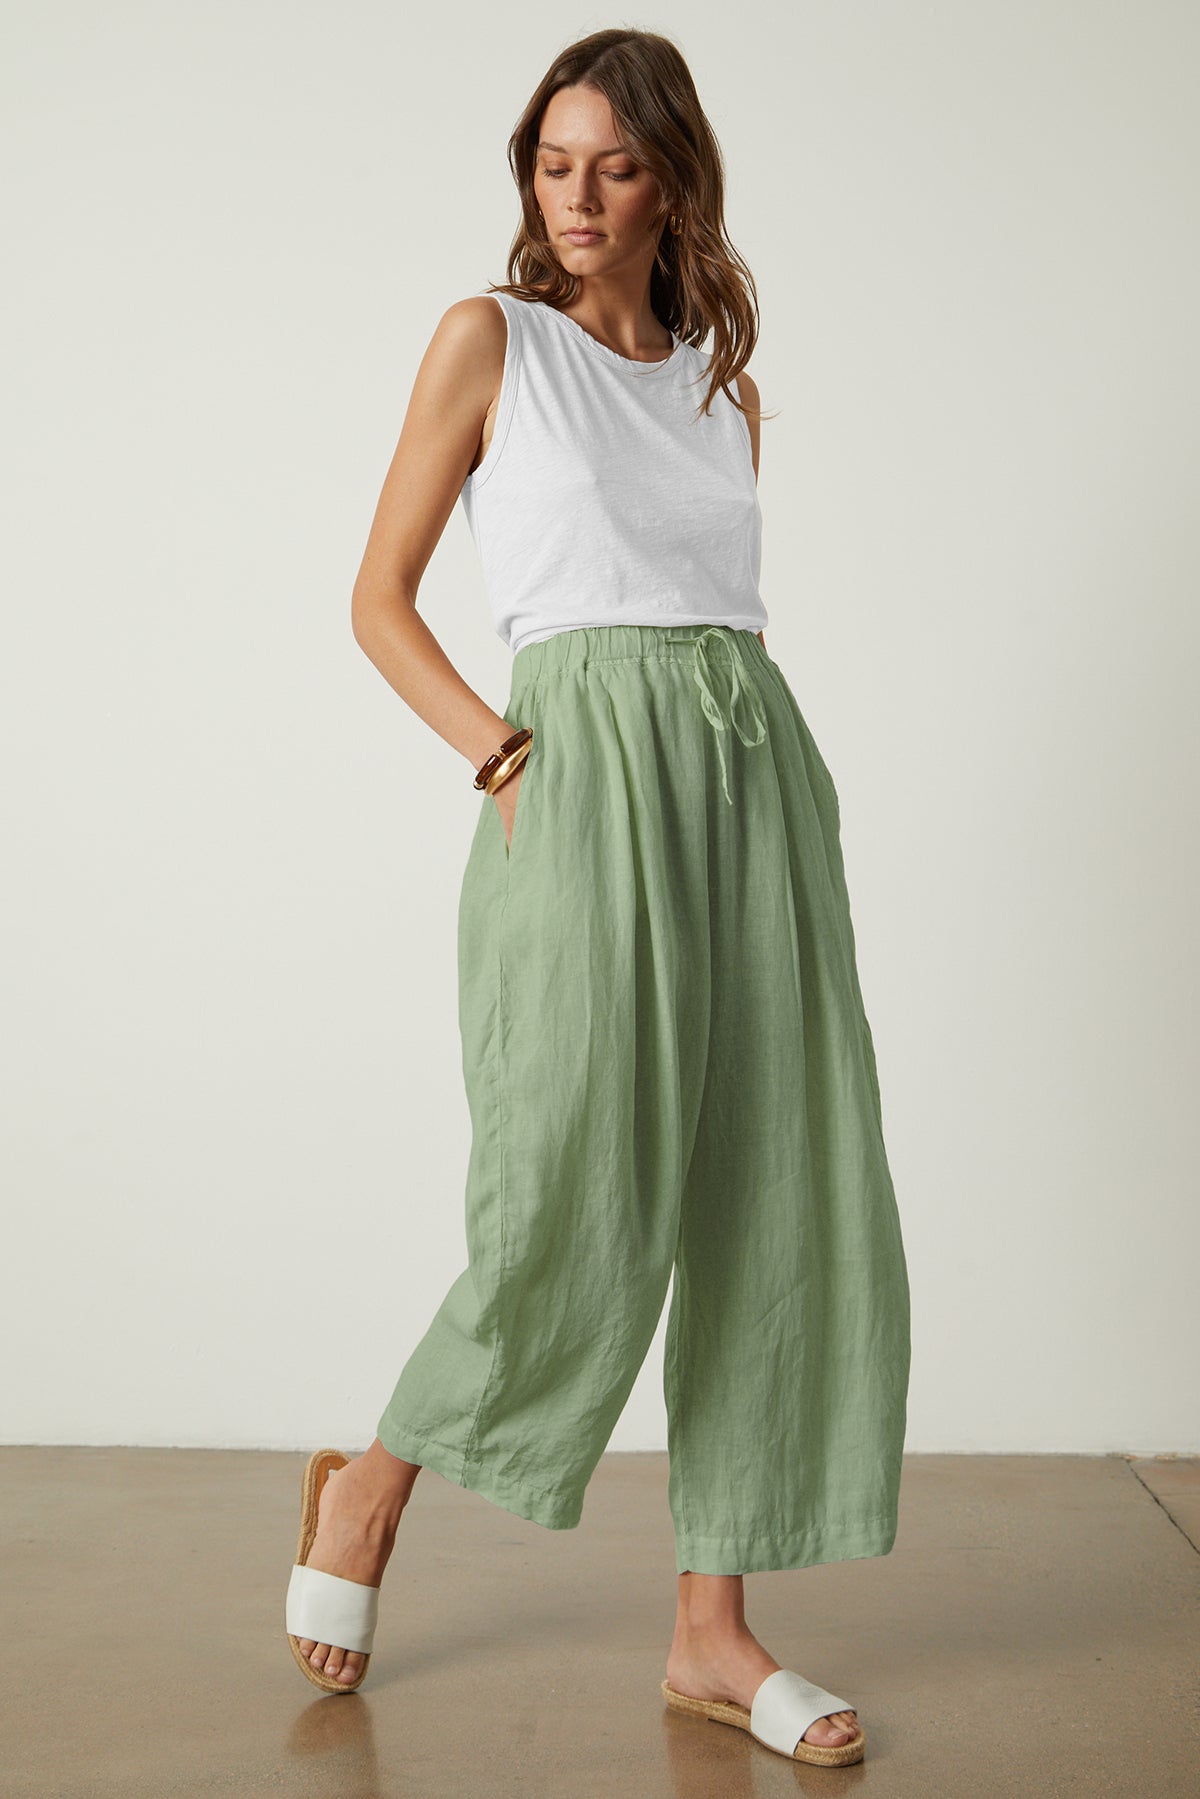 A woman wearing the Velvet by Graham & Spencer Hannah Linen Wide Leg Pant with a cropped leg.-35982213415105